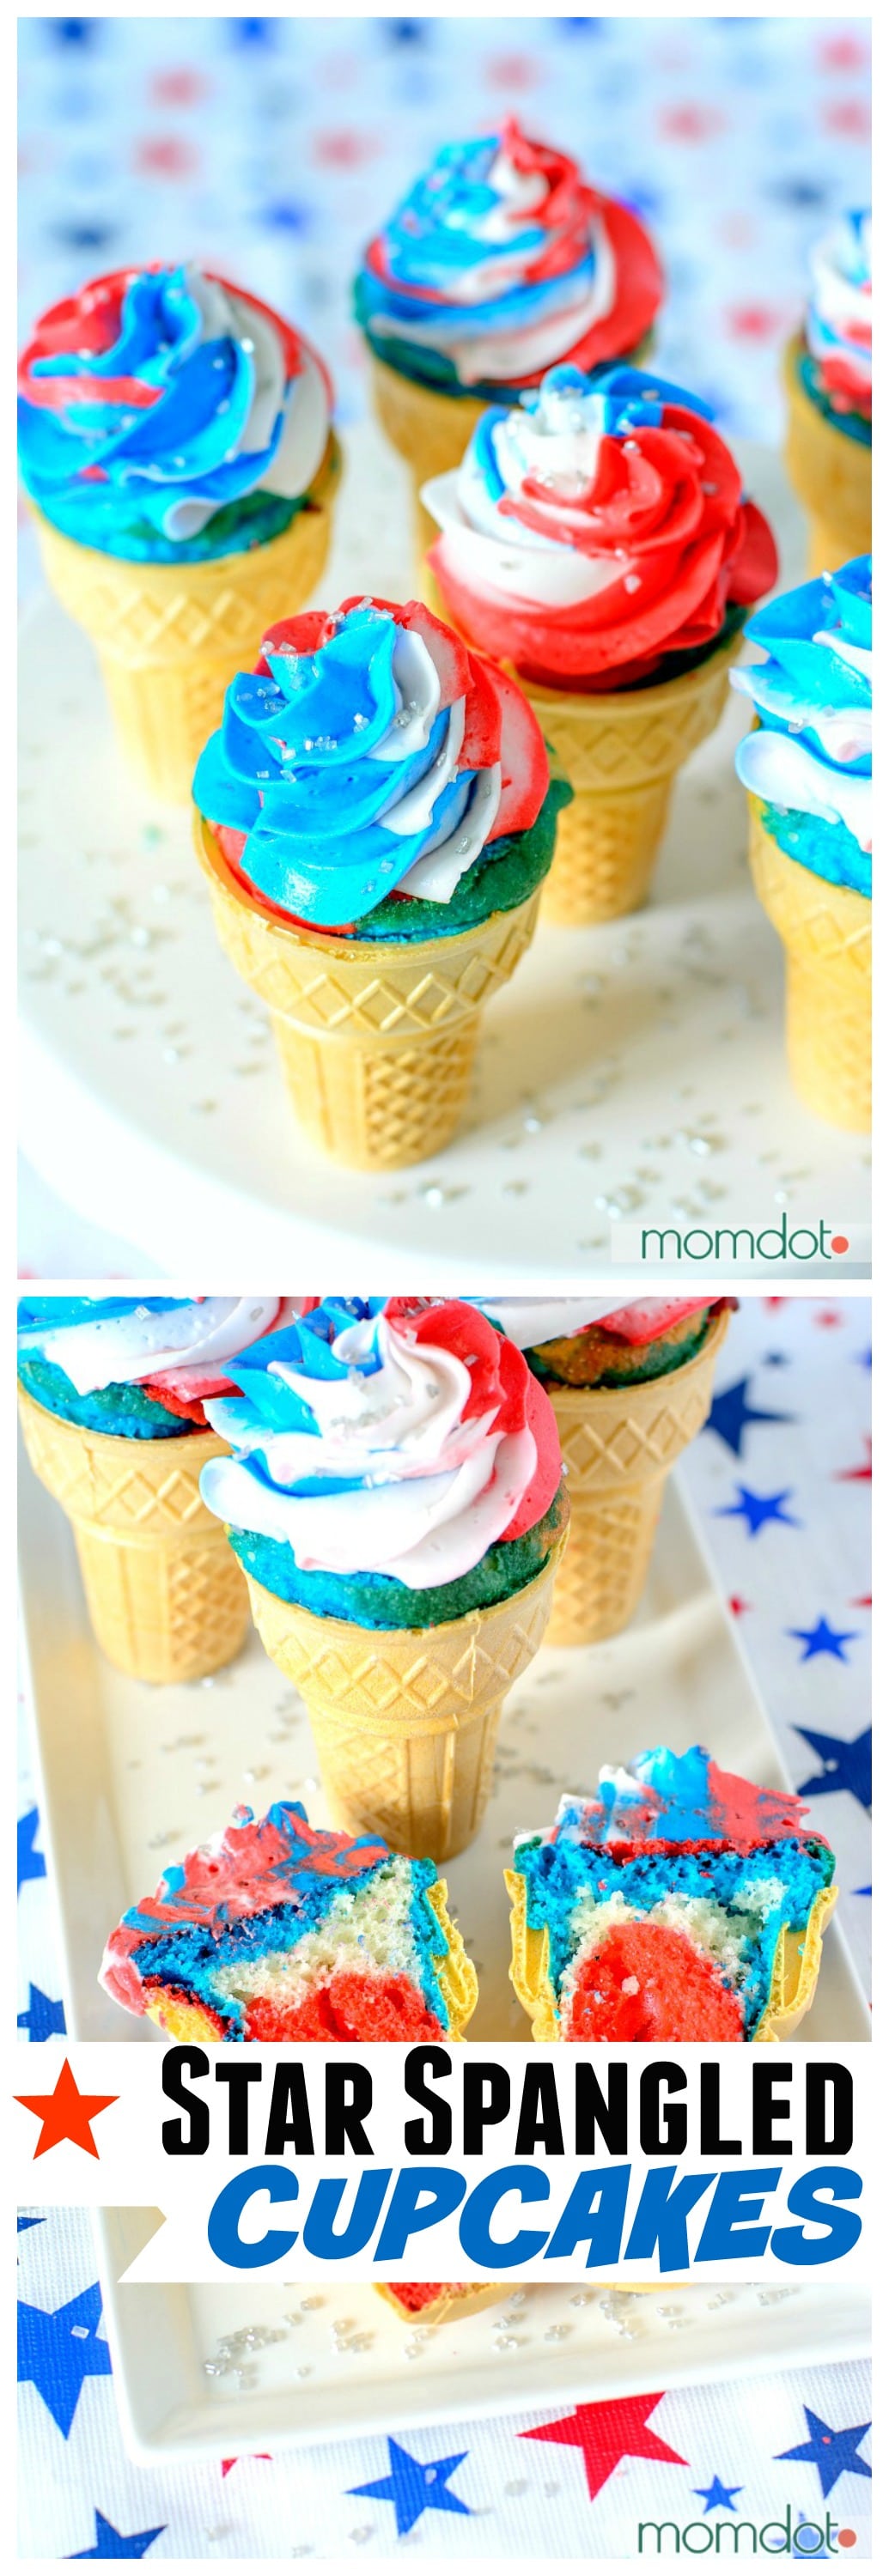 Star Spangled Cupcake Cones; Cupcakes perfect for a Patriotic Party and so easy to look Spectacular!